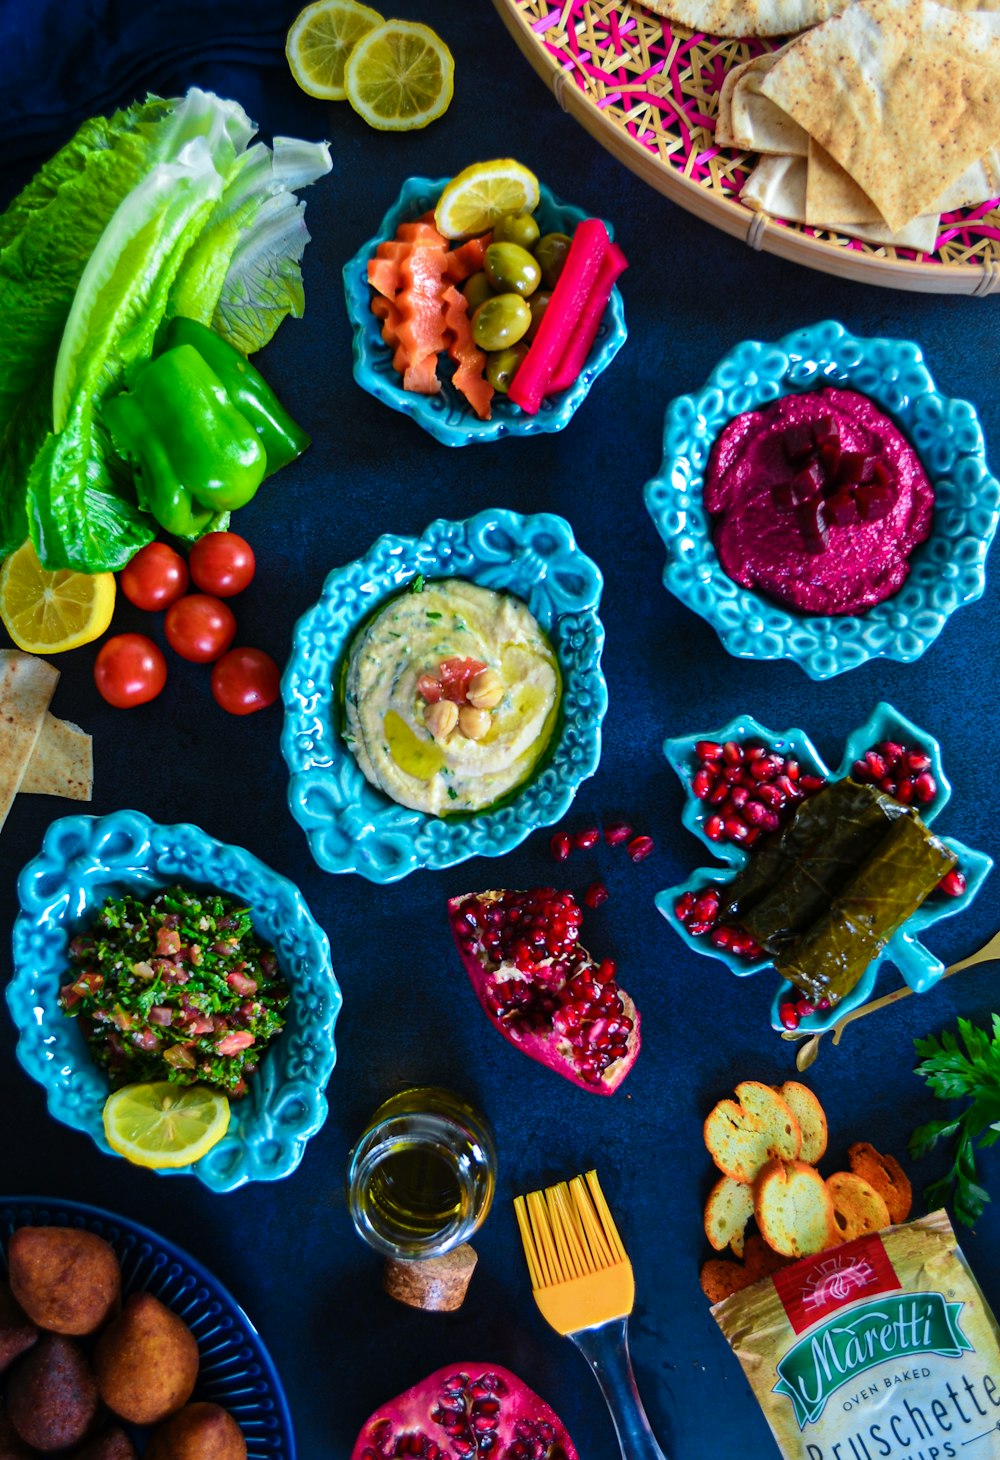 a table topped with plates and bowls of food